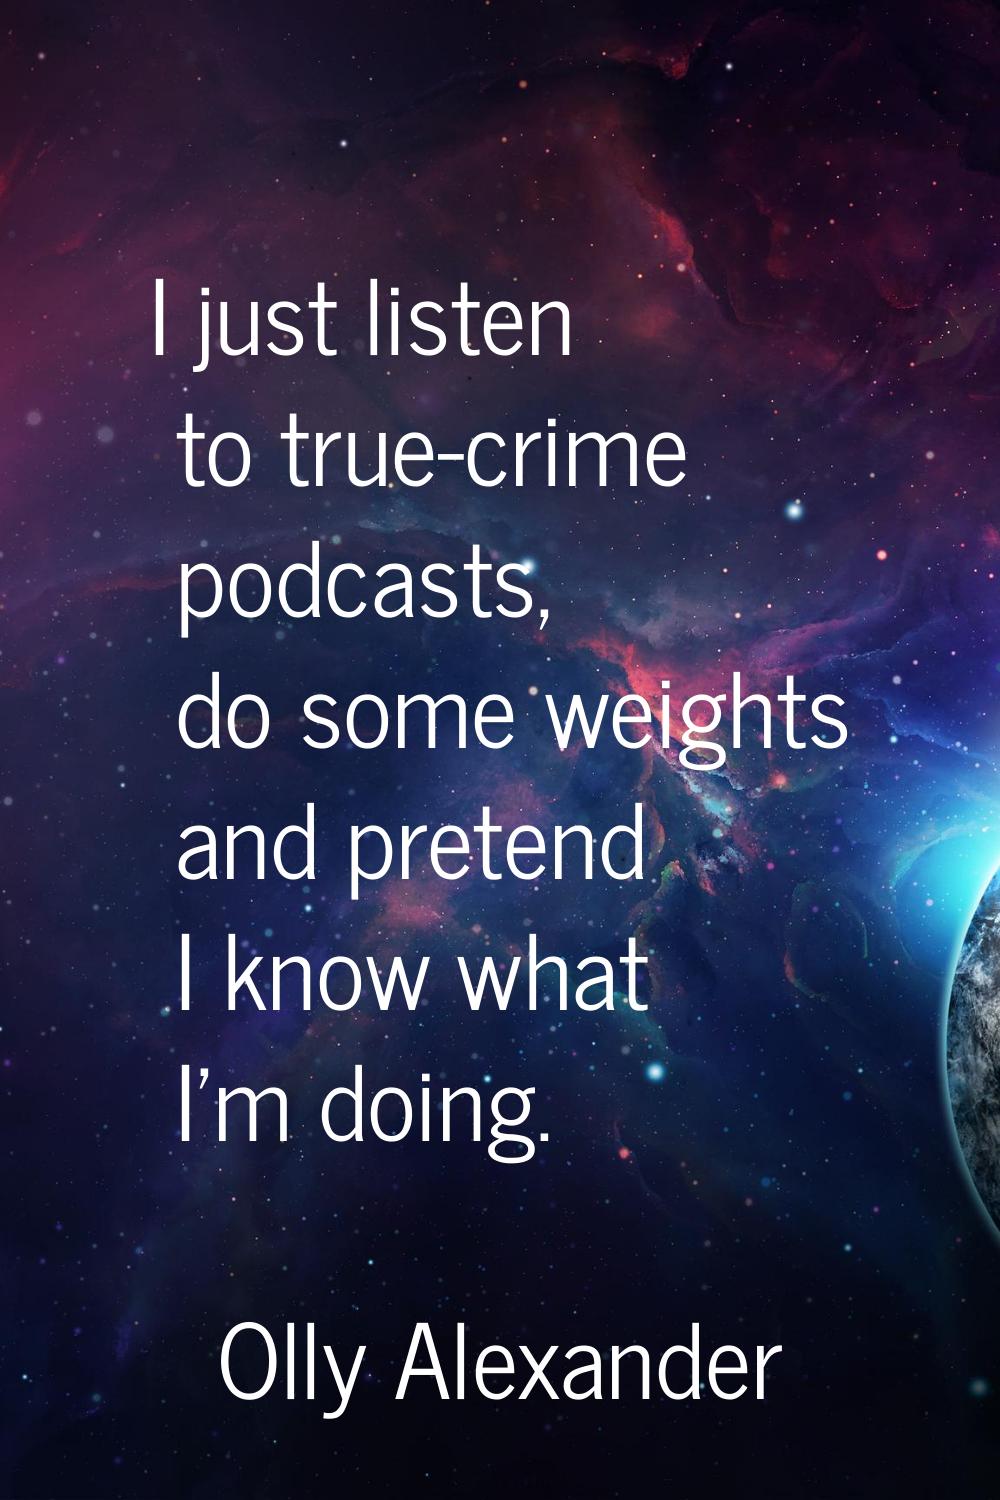 I just listen to true-crime podcasts, do some weights and pretend I know what I'm doing.